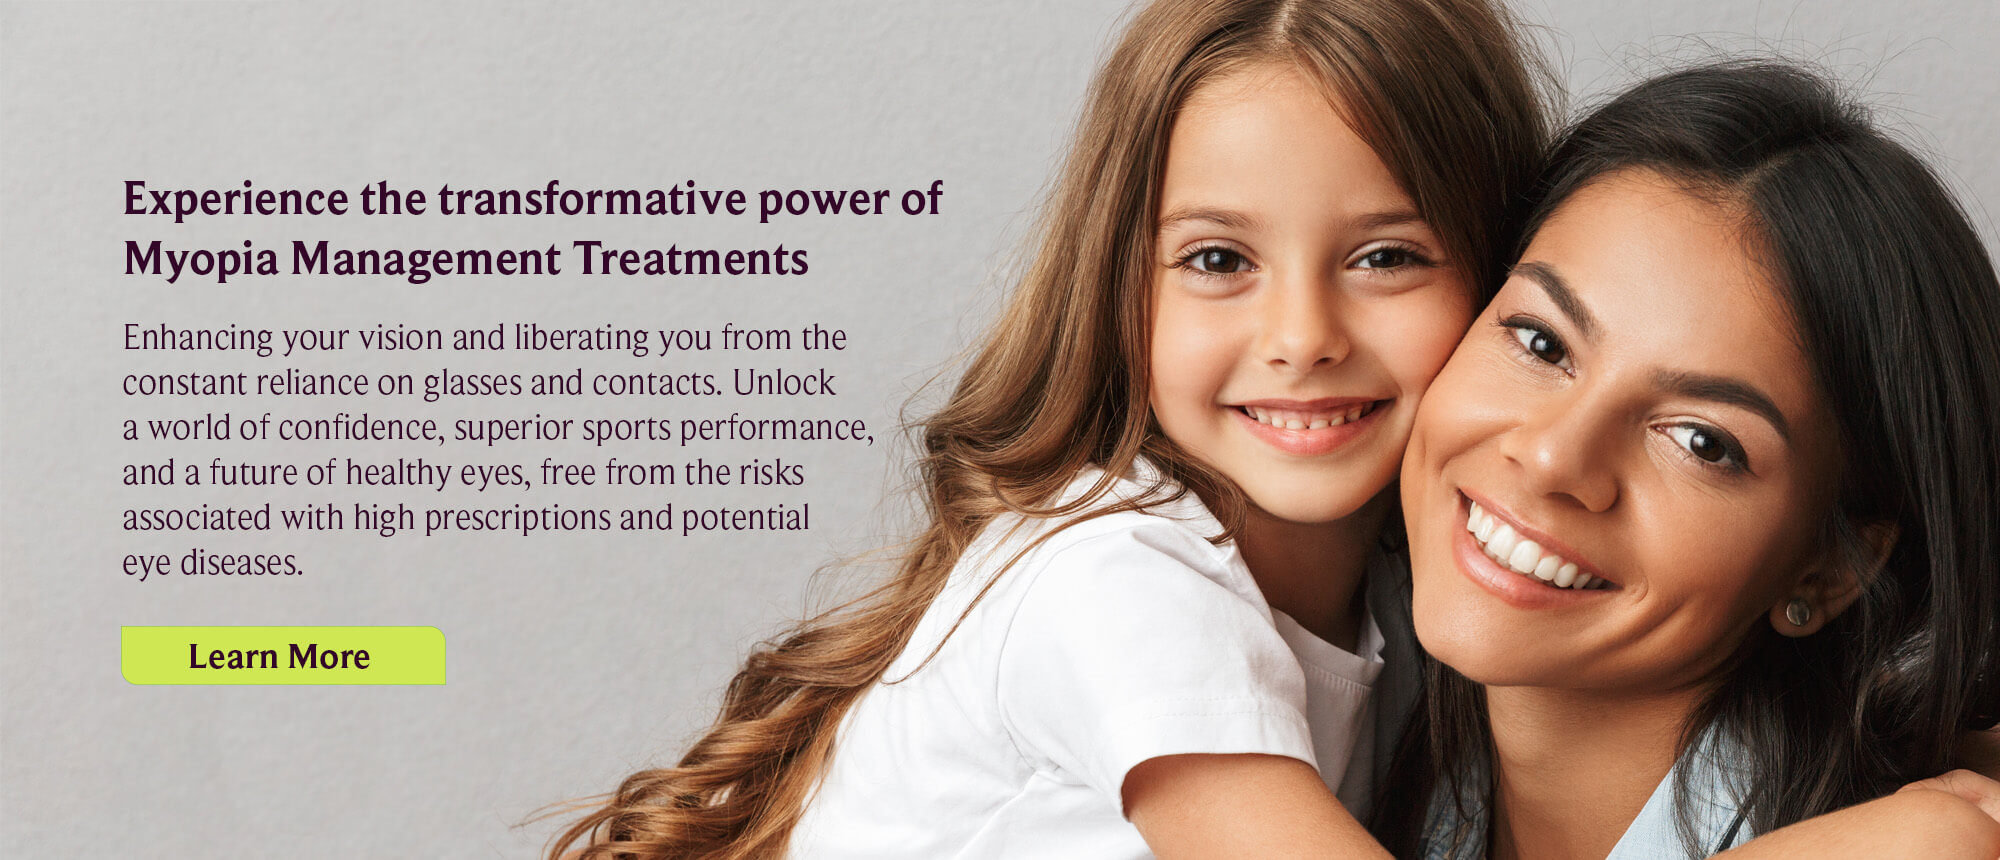 What are the Health Benefits of Sports for Children? : Unlocking the Transformative Power